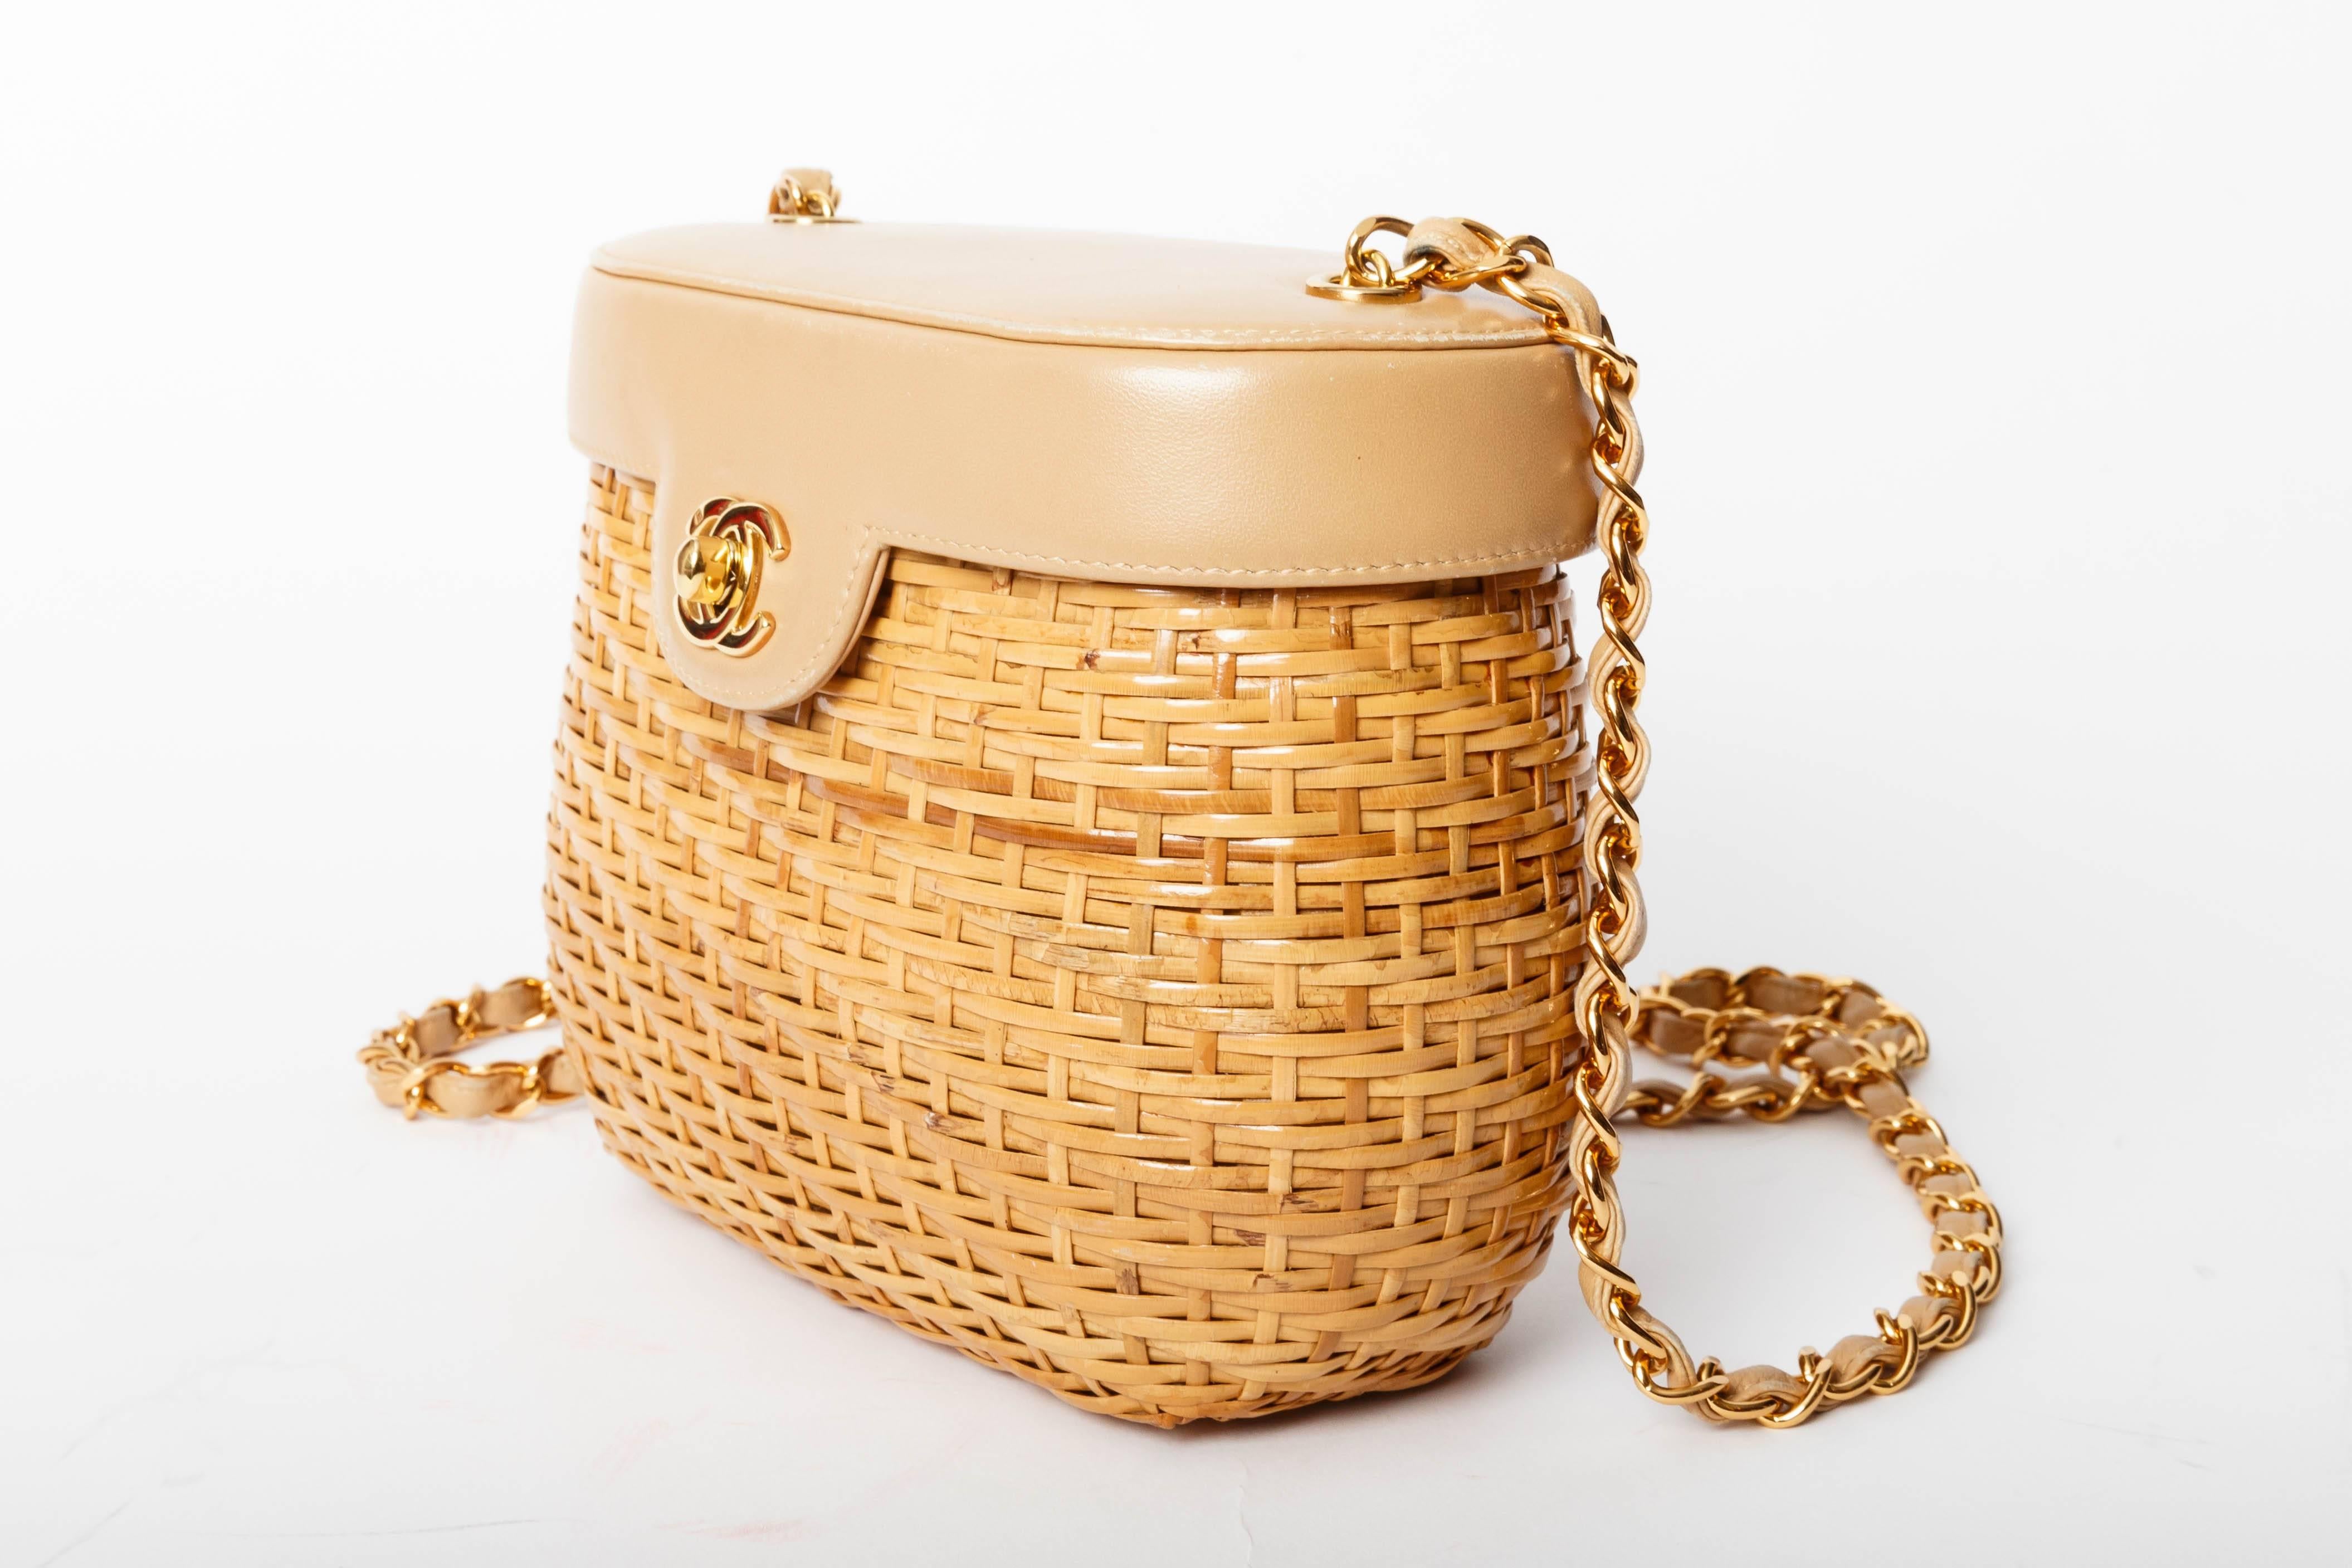 Fabulous CHANEL Vintage Tan Lambskin and Straw Bag with Gold Hardware. 
Features a gold chain shoulder strap with gold Chanel CC Mademoiselle turn lock. 
Condition is excellent.
There is no hologram or accompanying authenticity card with this piece